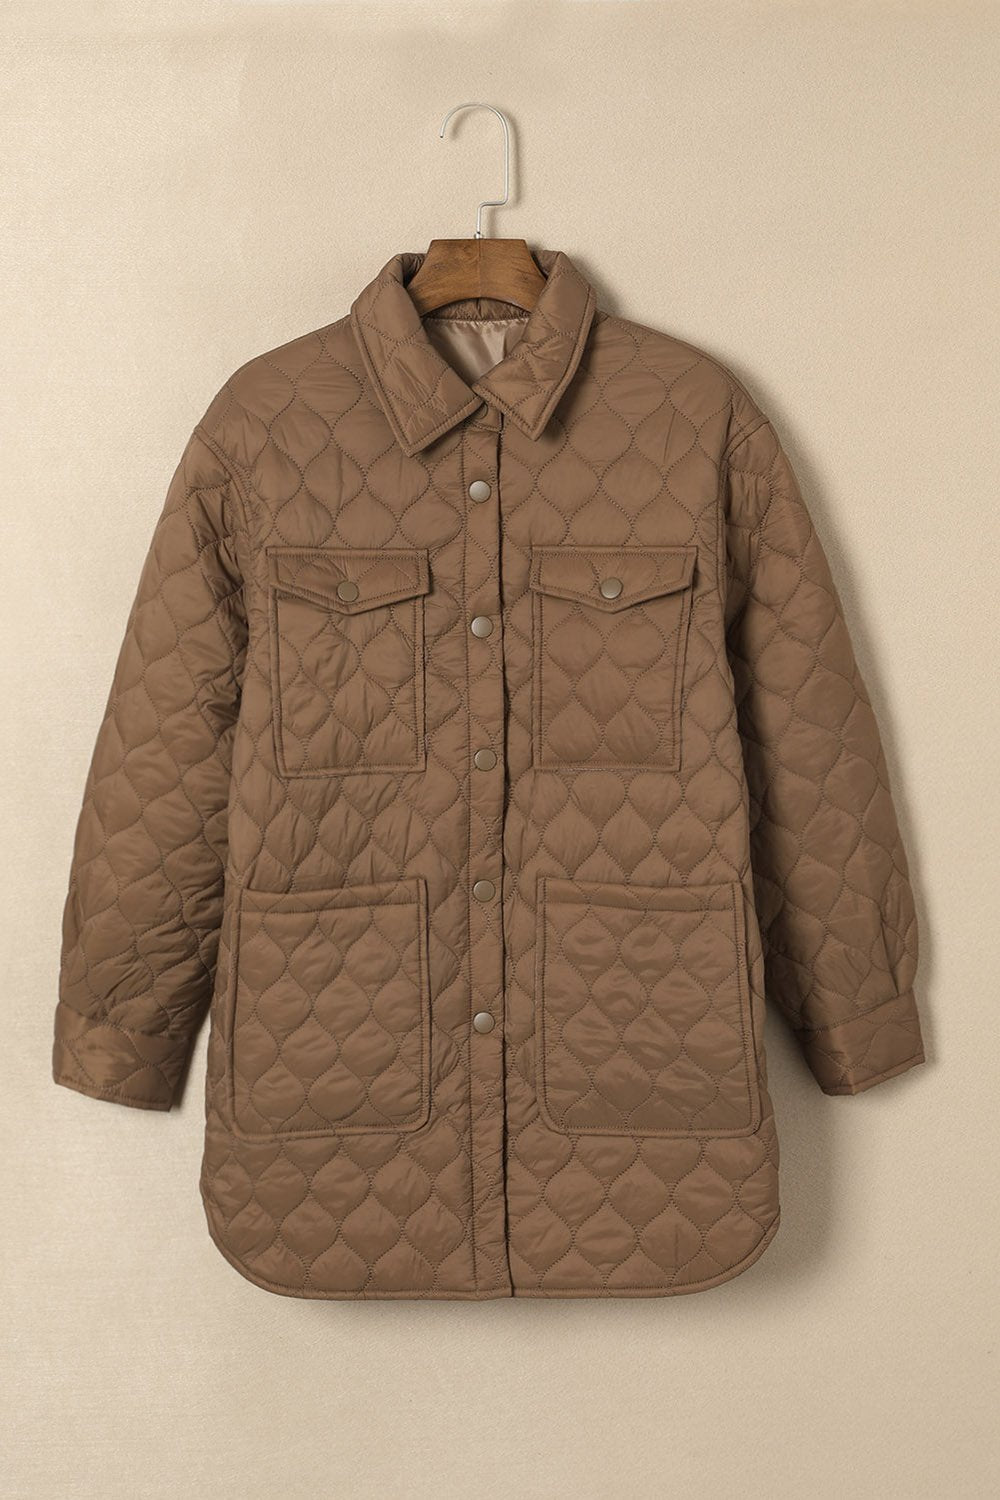 Snap Down Collared Winter Coat - Jackets - FITGGINS